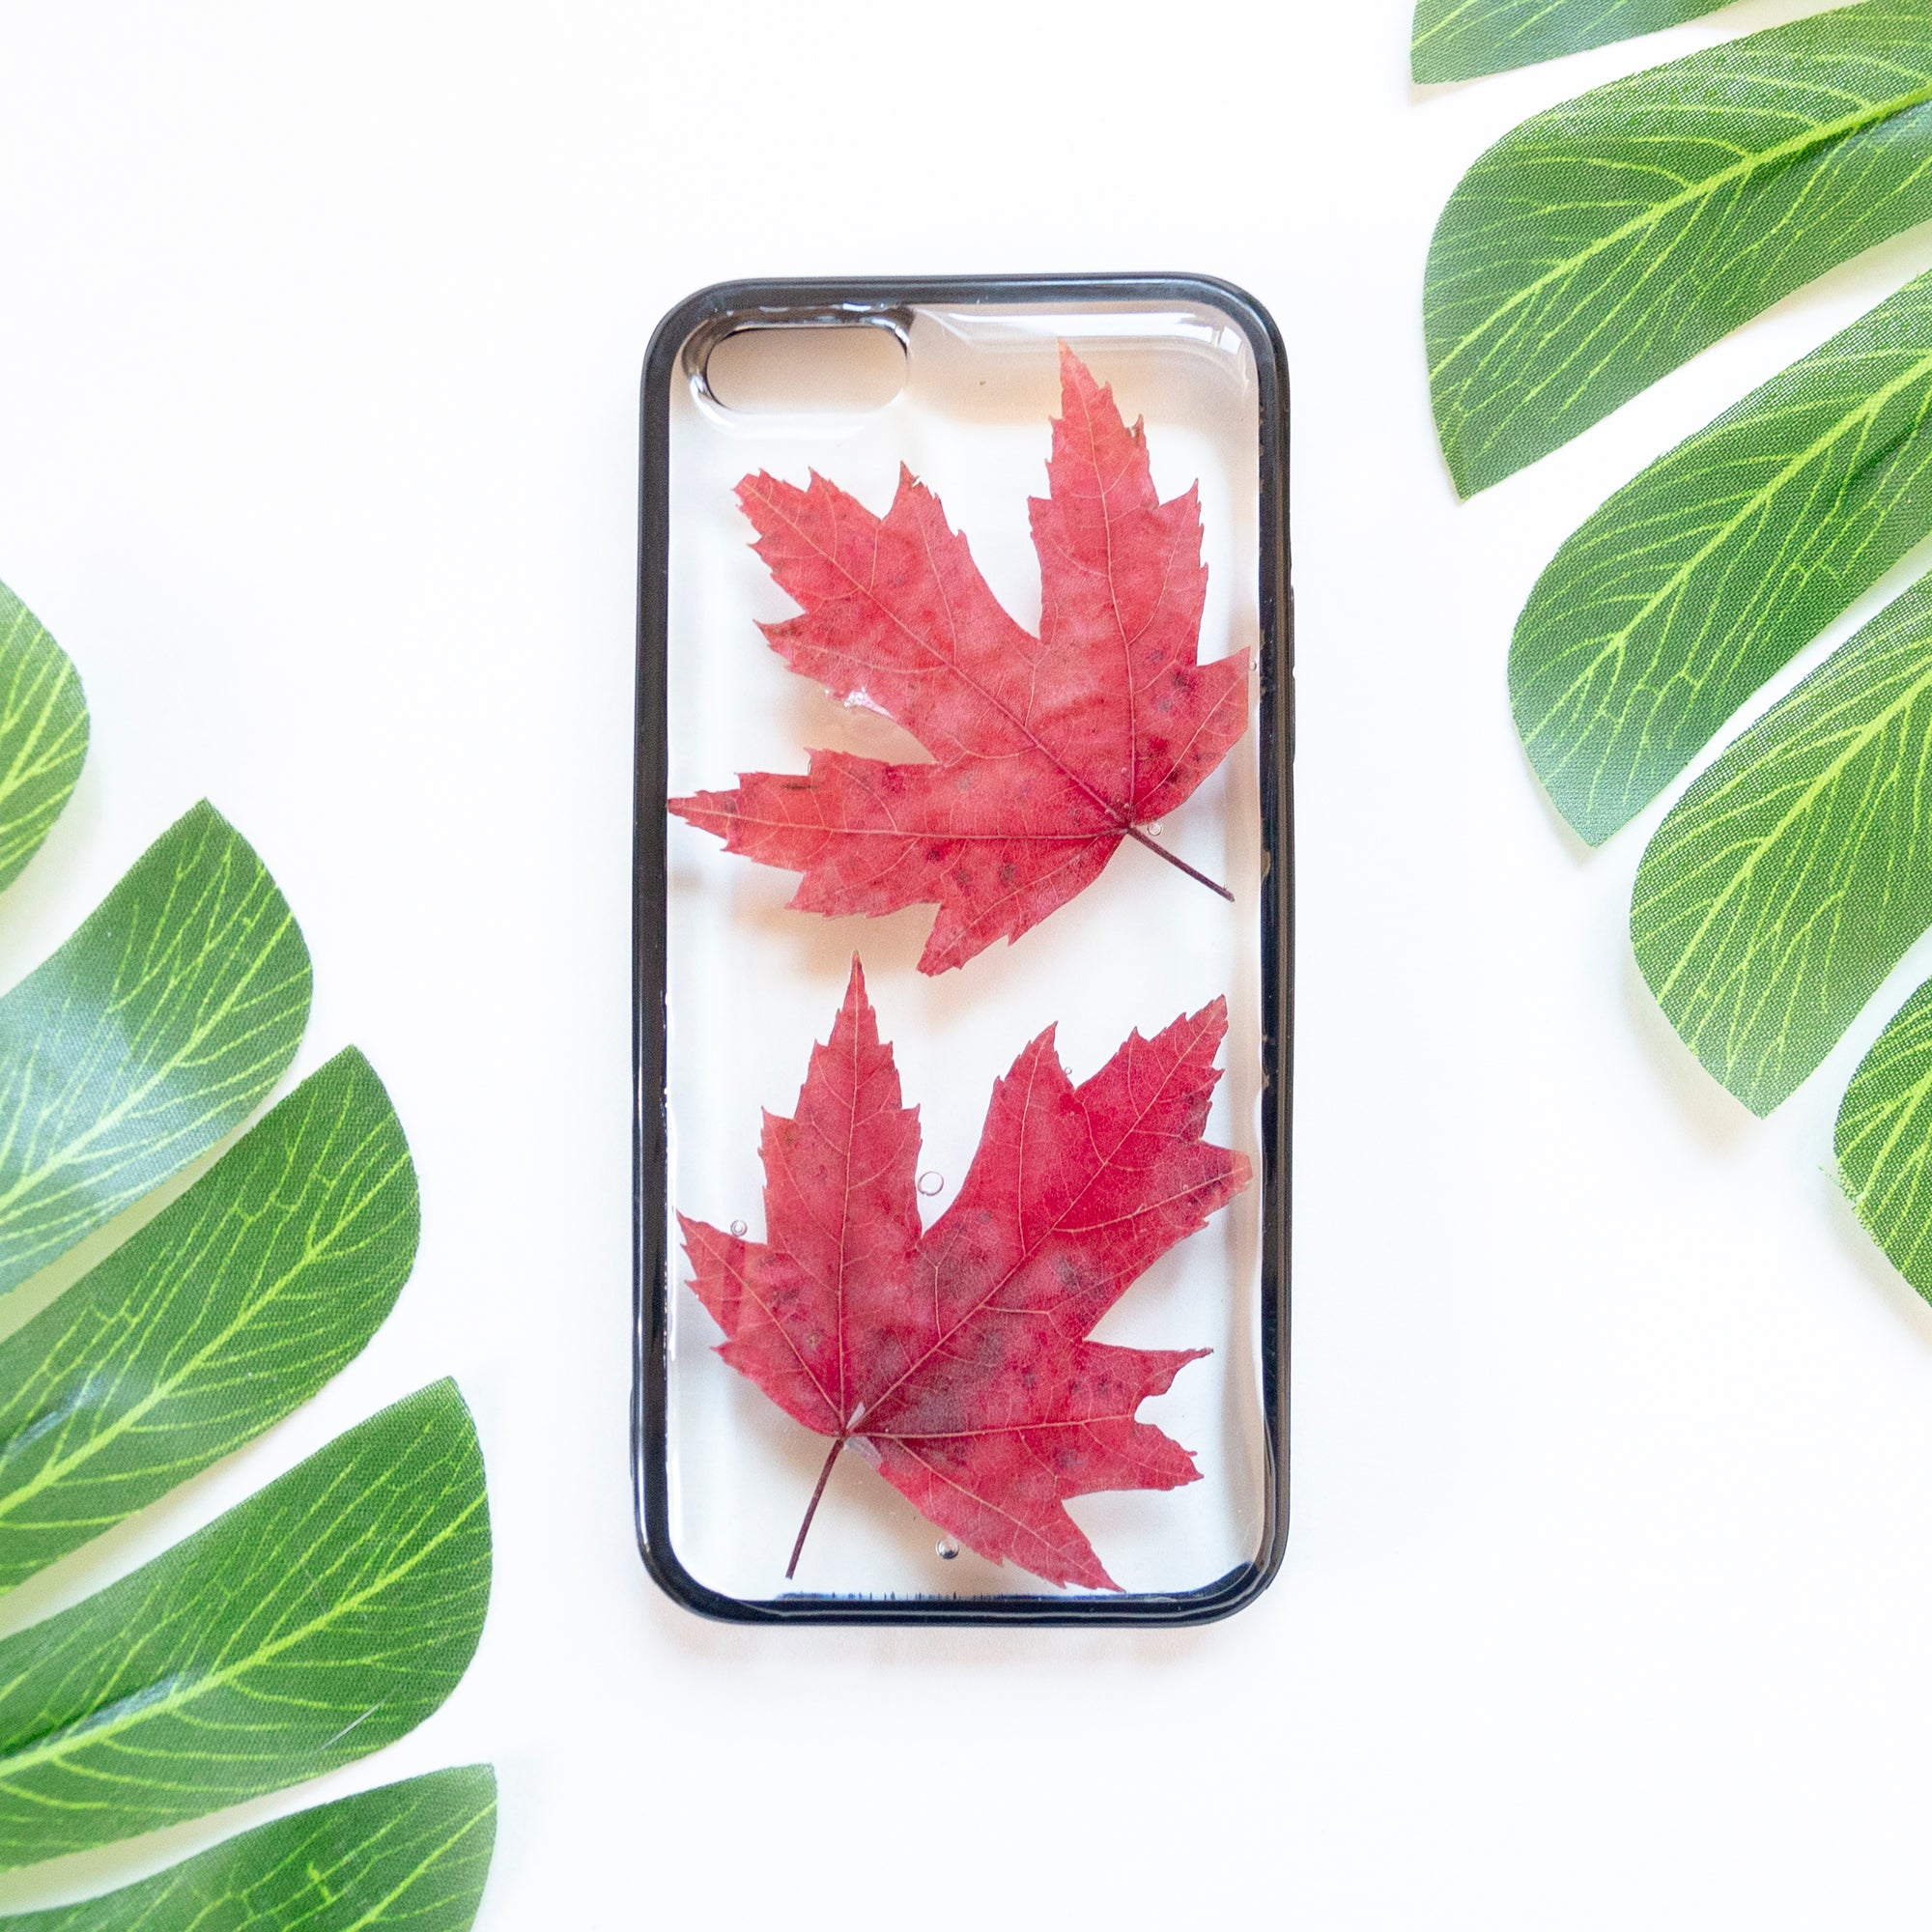 Floral Neverland Floralfy Fall Leaves Real Pressed Red Canadian Maple Leaf Flower Floral Foliage Botanical iPhone 5 5S SE Bumper Case 01